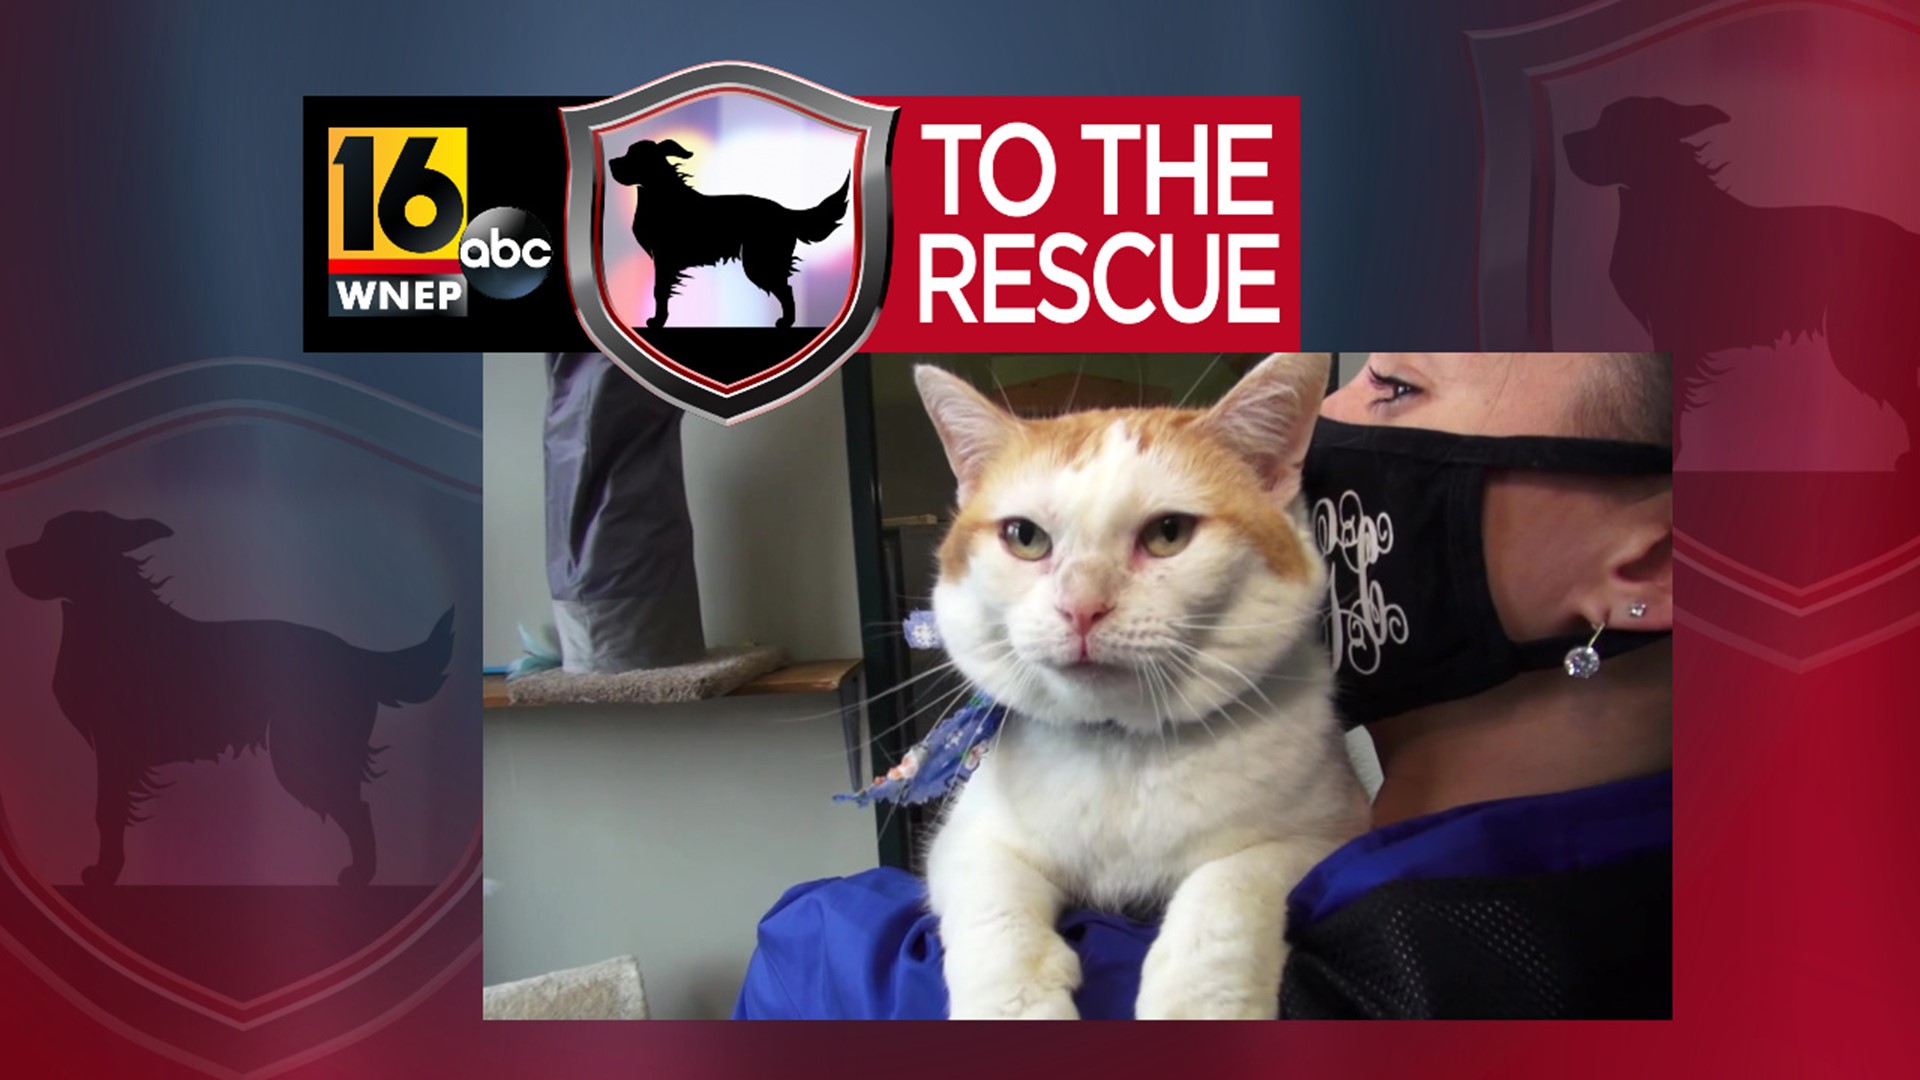 In this week's 16 To The Rescue, we meet an 8-year-old cat who loves to snuggle, give hugs and kisses, a has a very unique meow.